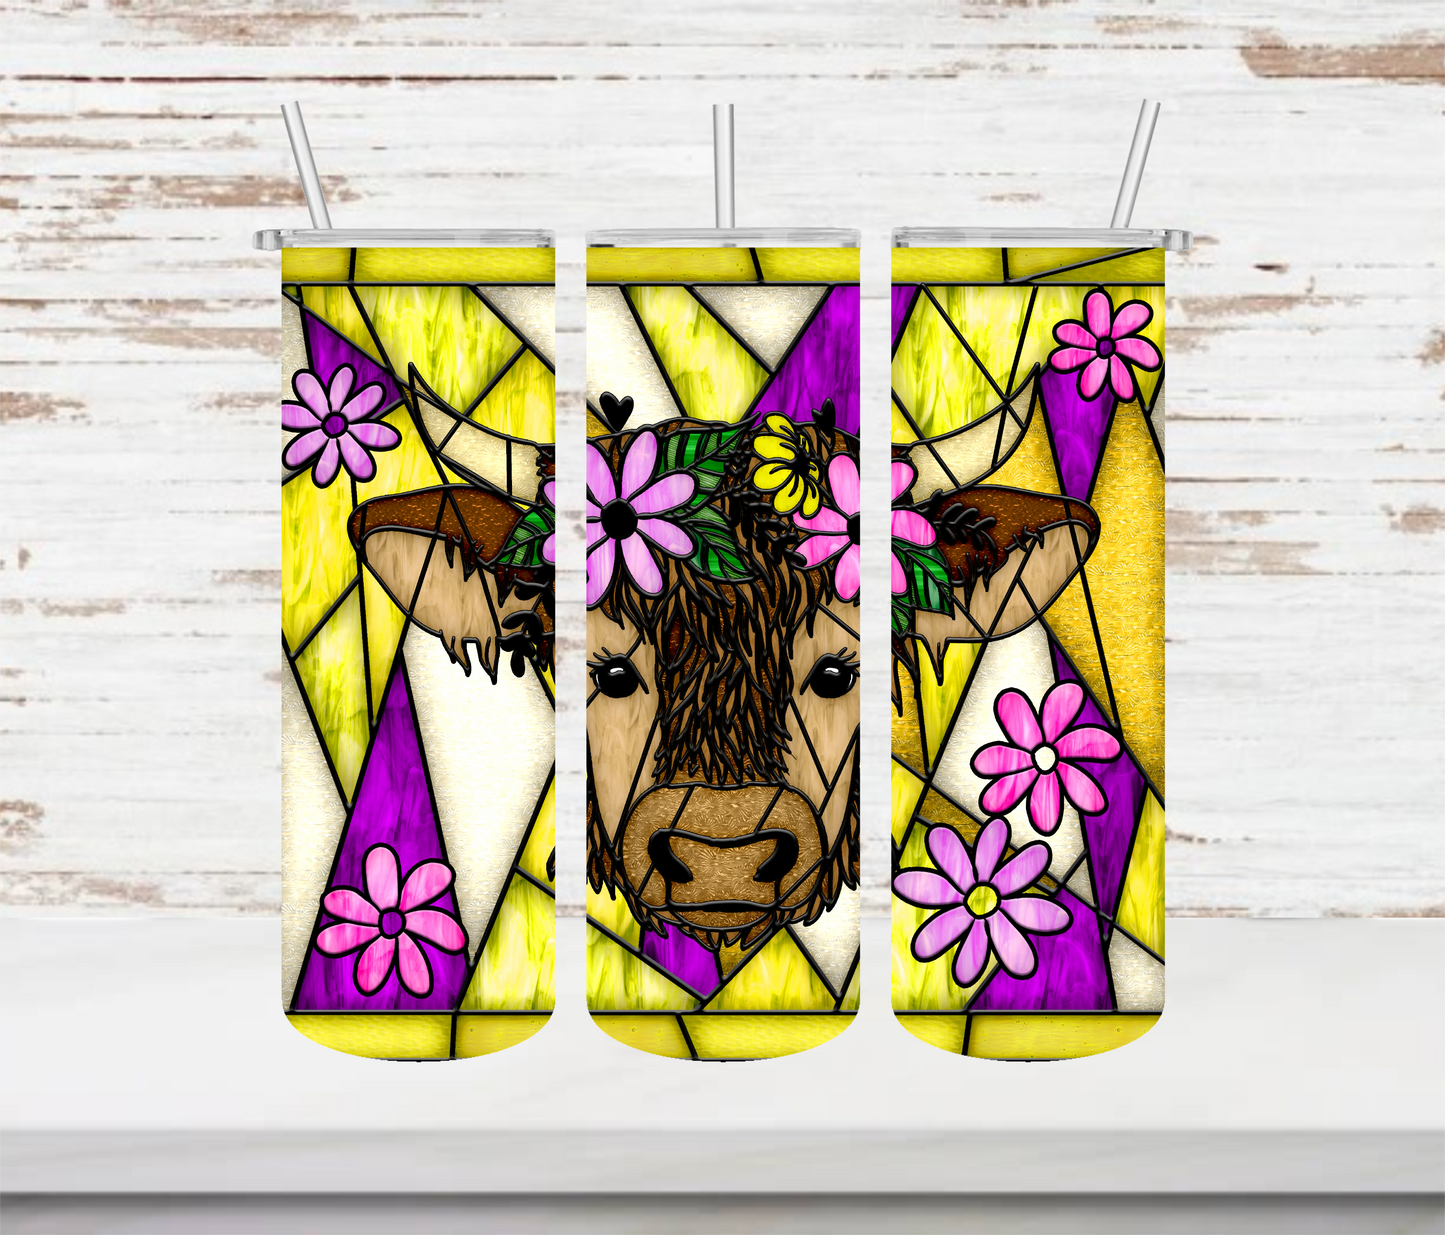 Highland Stained Glass Tumbler